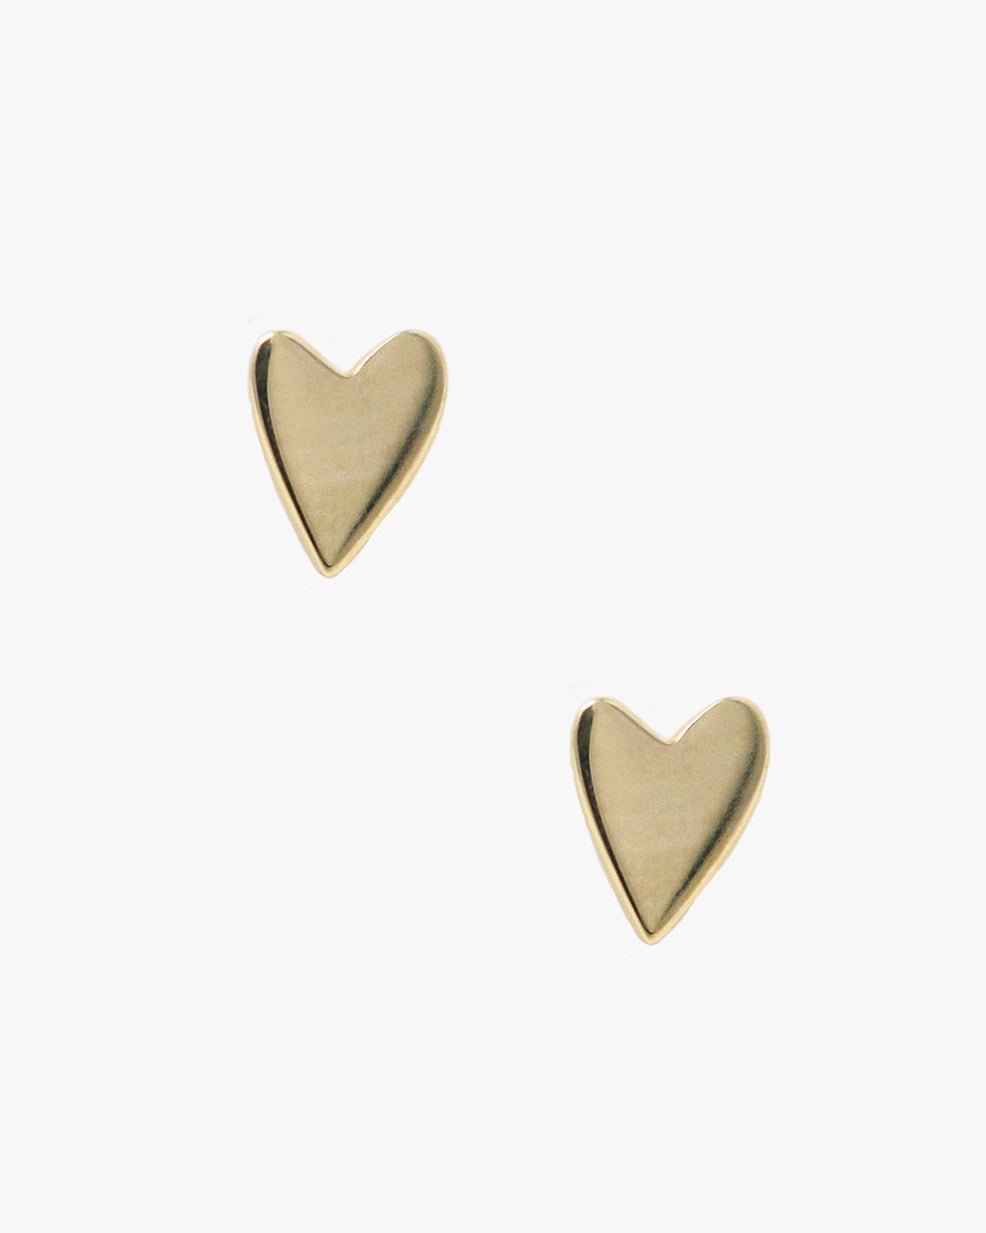 HUCKLEBERRY MINI HEART STUDS - Shop Cupcakes and Cashmere